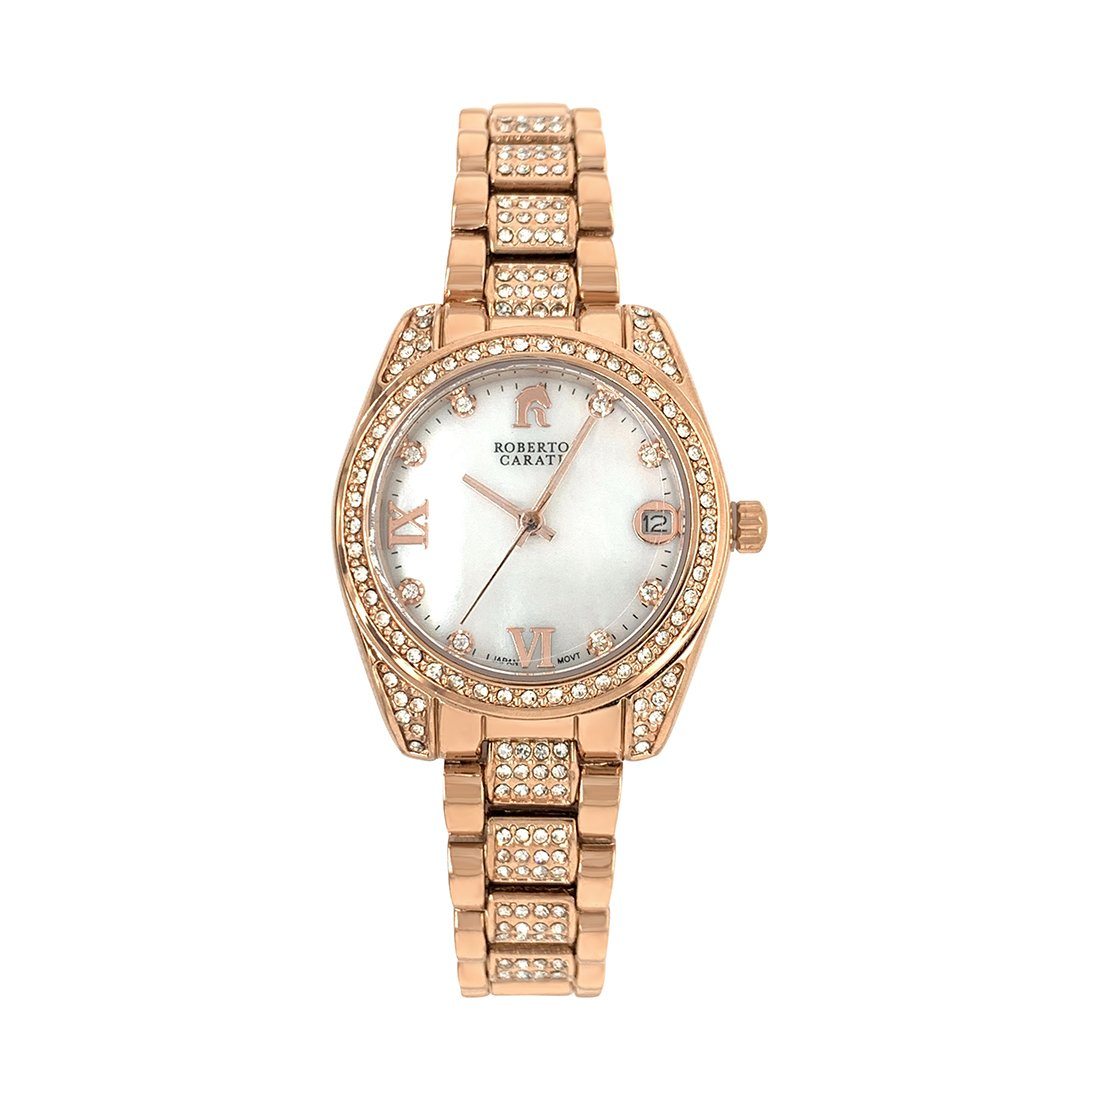 Roberto Carati Luna Rose Gold and Mother of Pearl Watch Watches Roberto Carati 